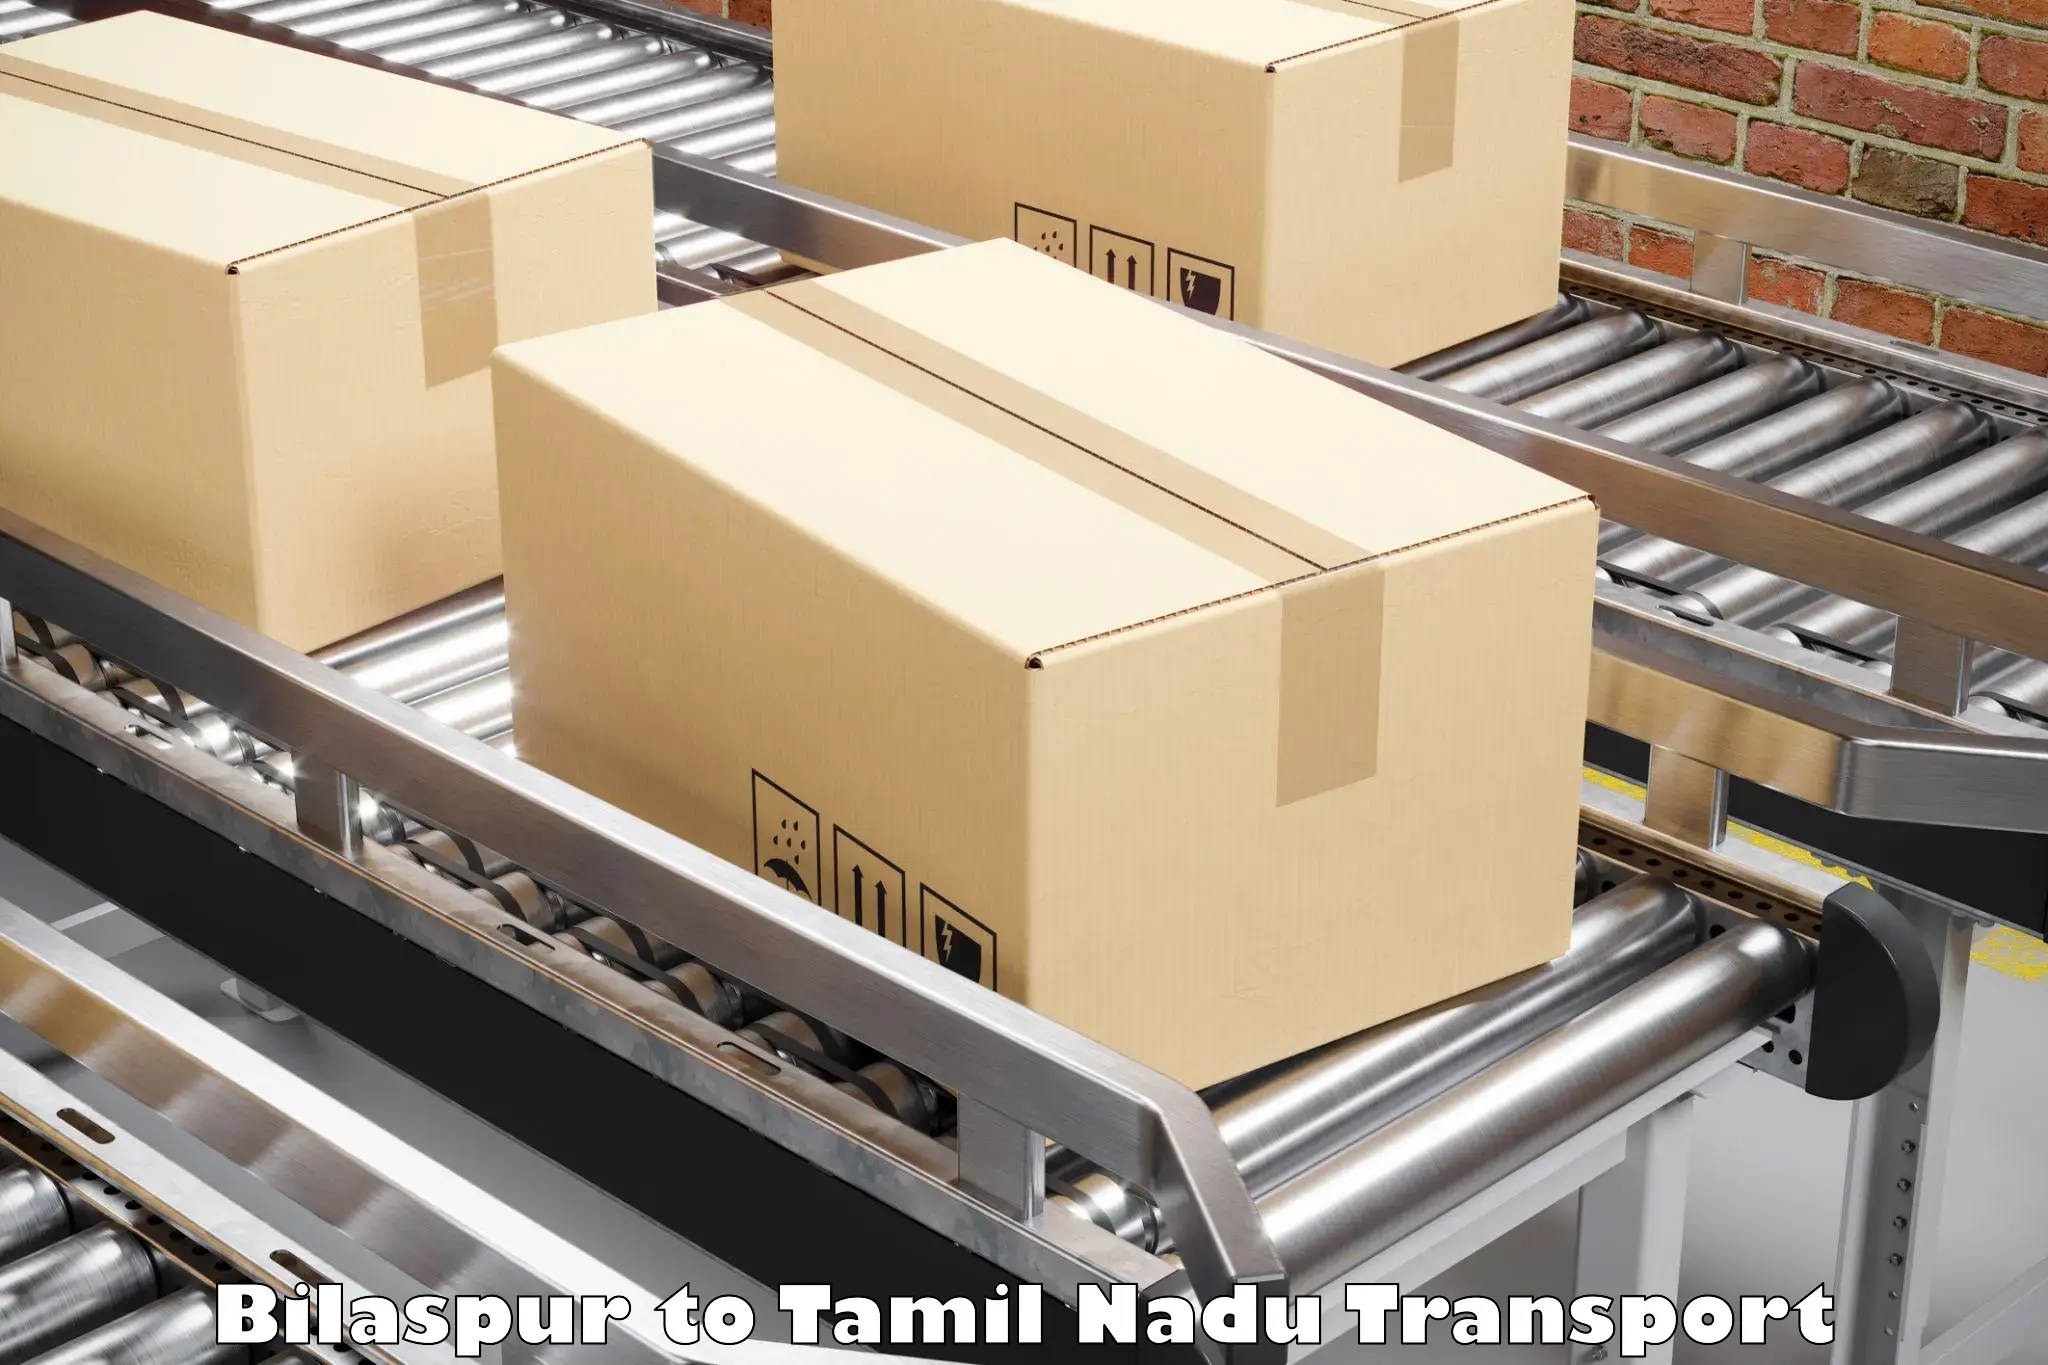 Truck transport companies in India Bilaspur to Chennai